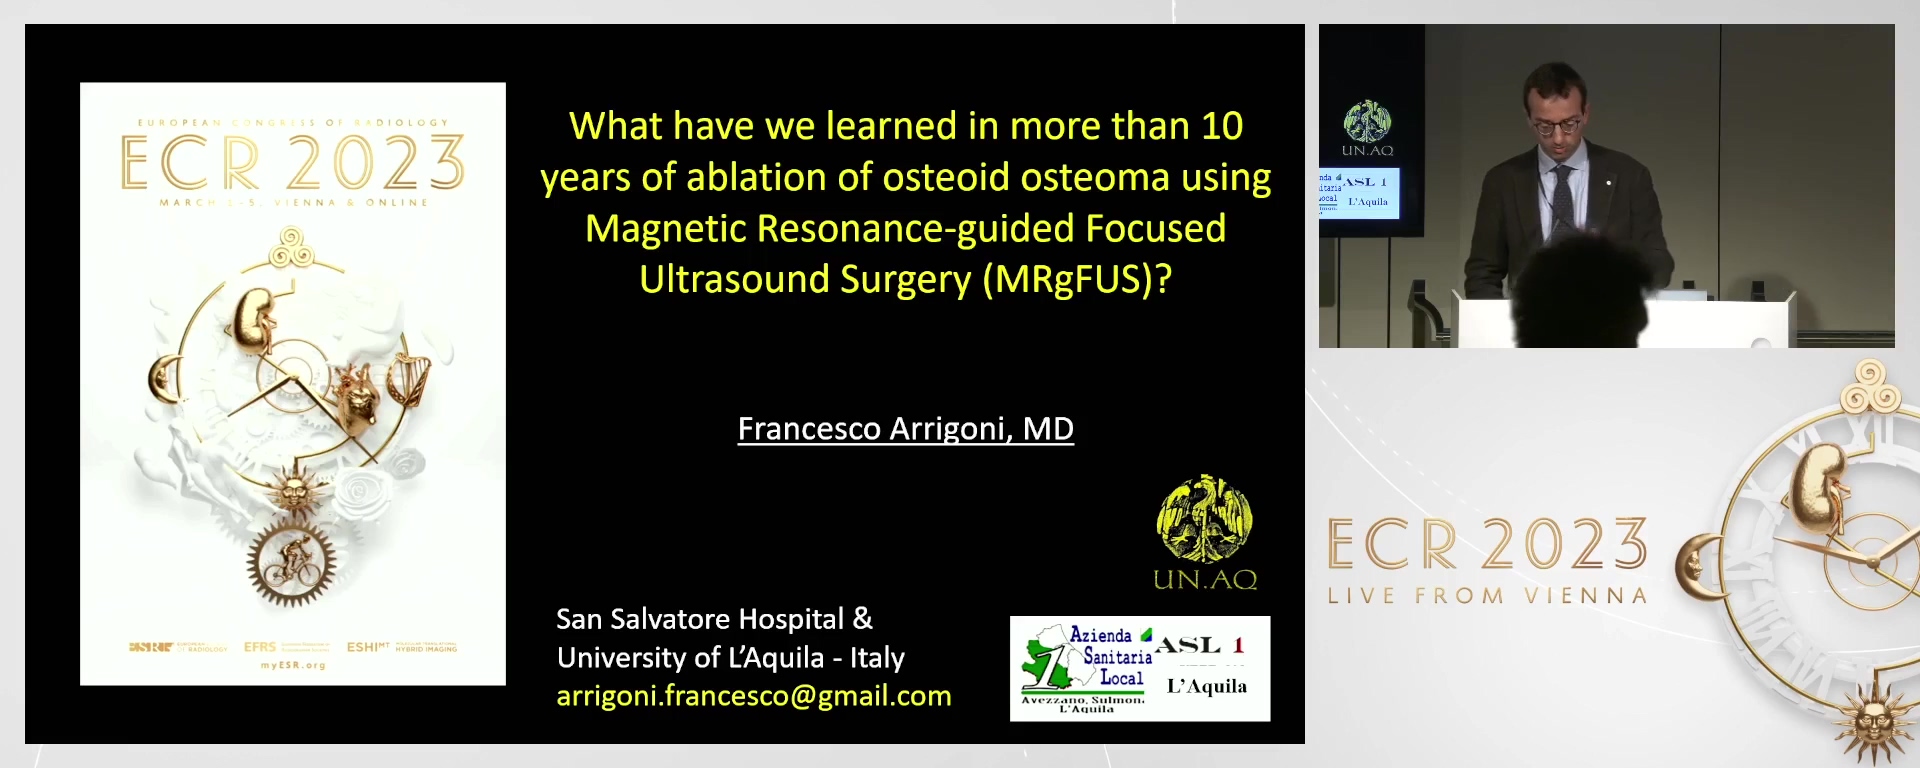 What have we learned in more than 10 years of ablation of osteoid osteoma using Magnetic Resonance-guided Focused Ultrasound Surgery (MRgFUS)?